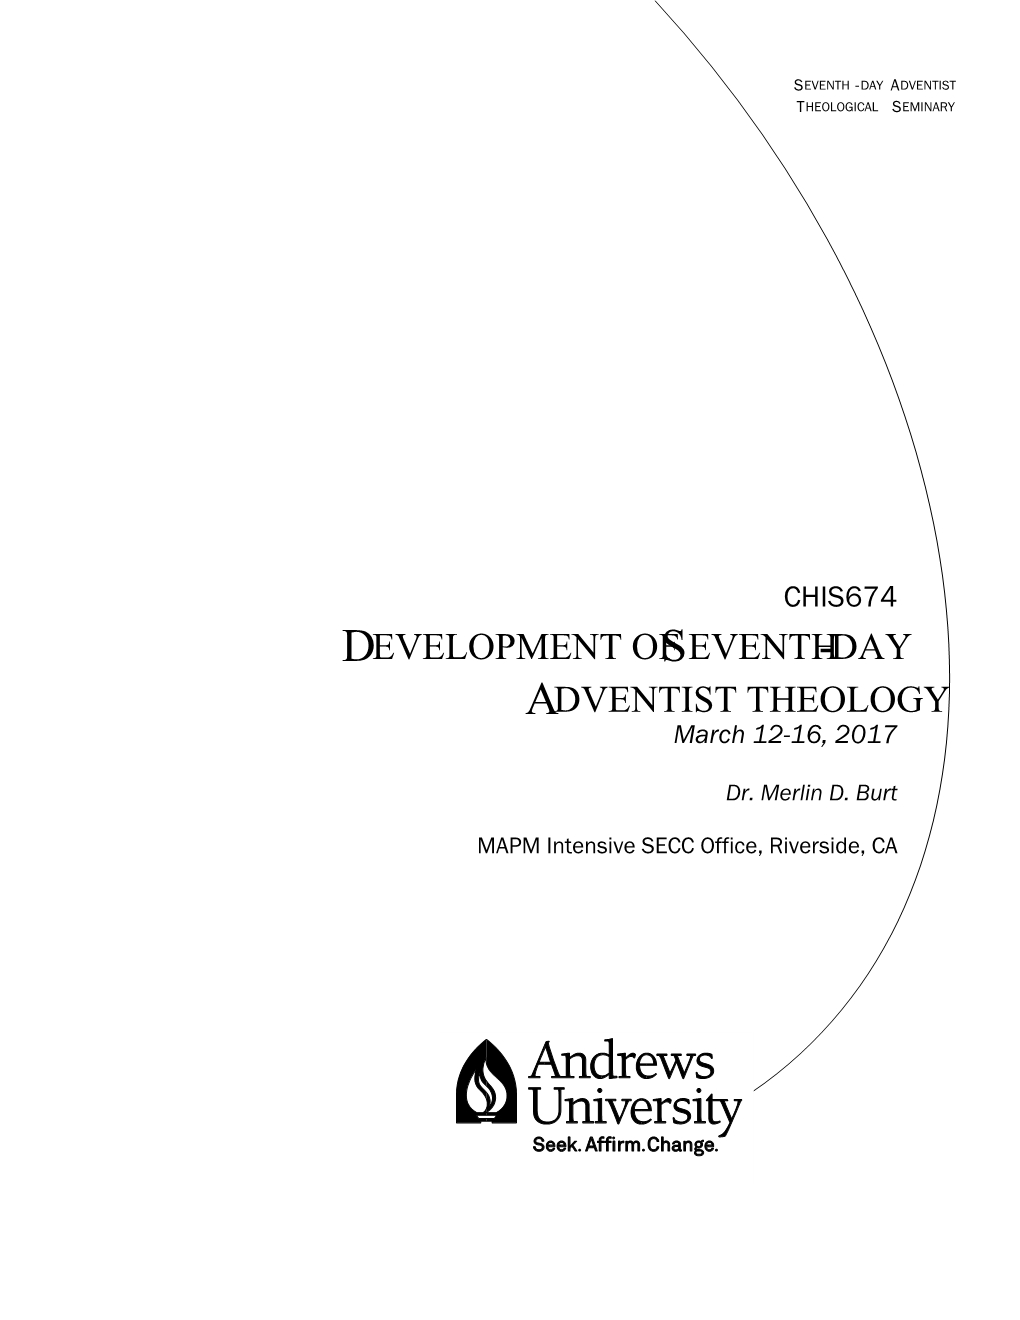 Development of Seventh-Day Adventist Theology; and Is Editor of Understanding Ellen White, a Book Published by Pacific Press for the Ellen G